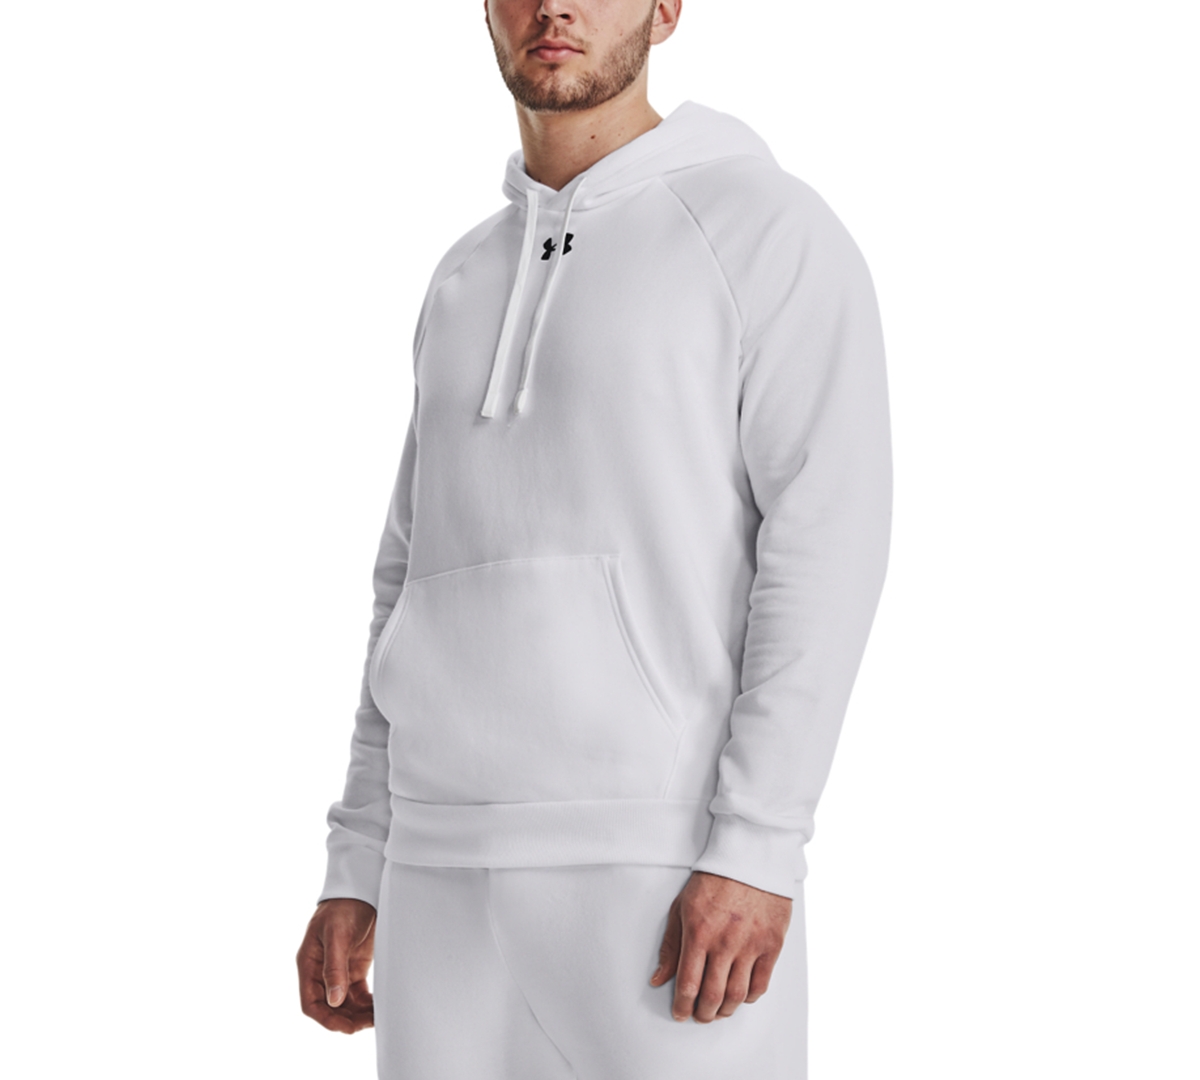 Under Armour Men's Rival Logo Embroidered Fleece Hoodie In White,blk